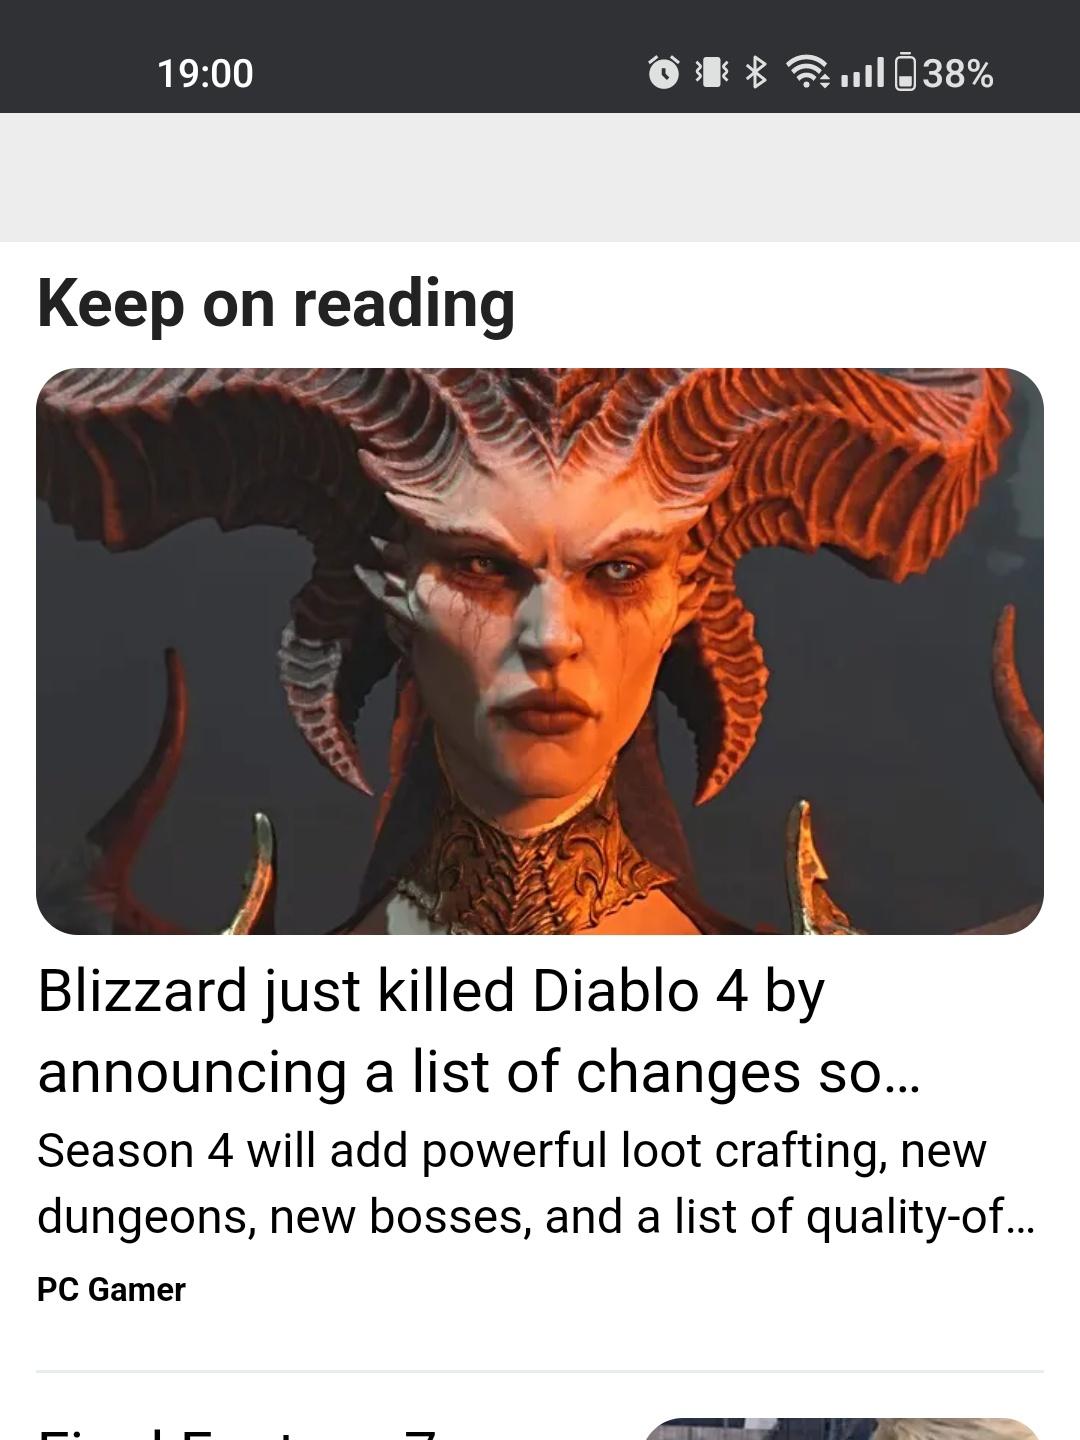 Clickbaits are such appropriate journalism